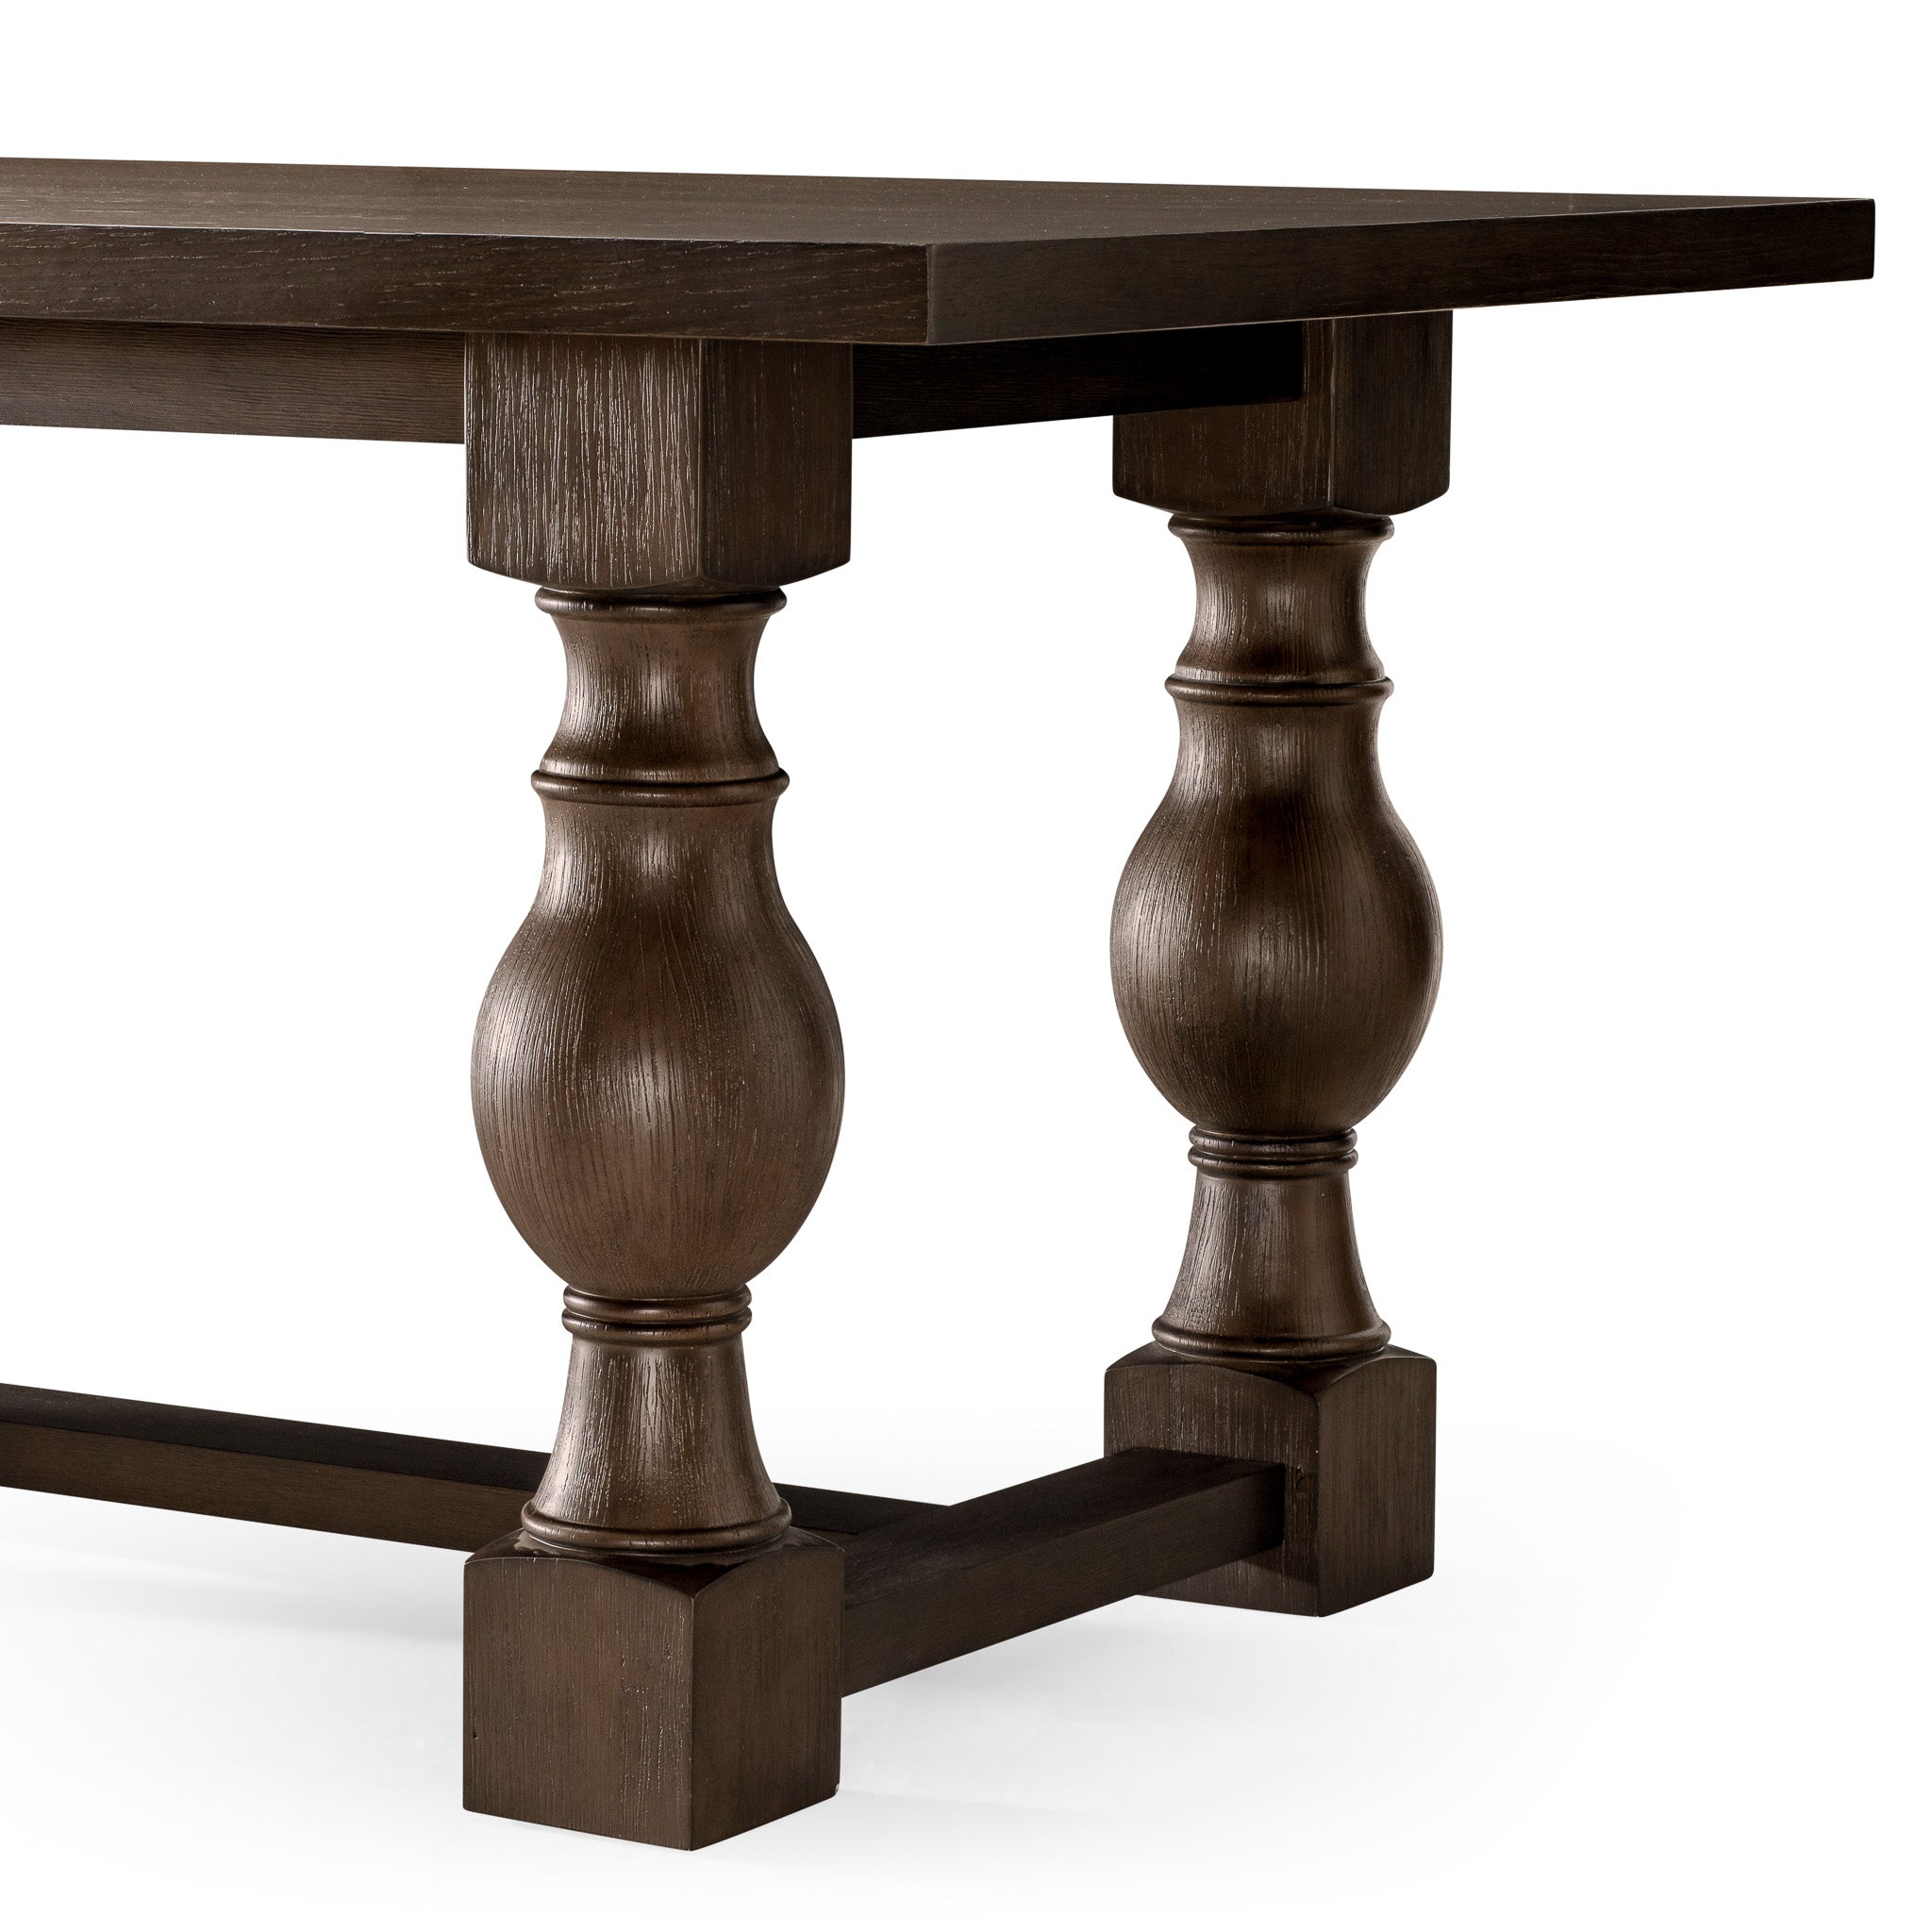 Leon Classical Wooden Dining Table in Antiqued Brown Finish in Dining Furniture by Maven Lane